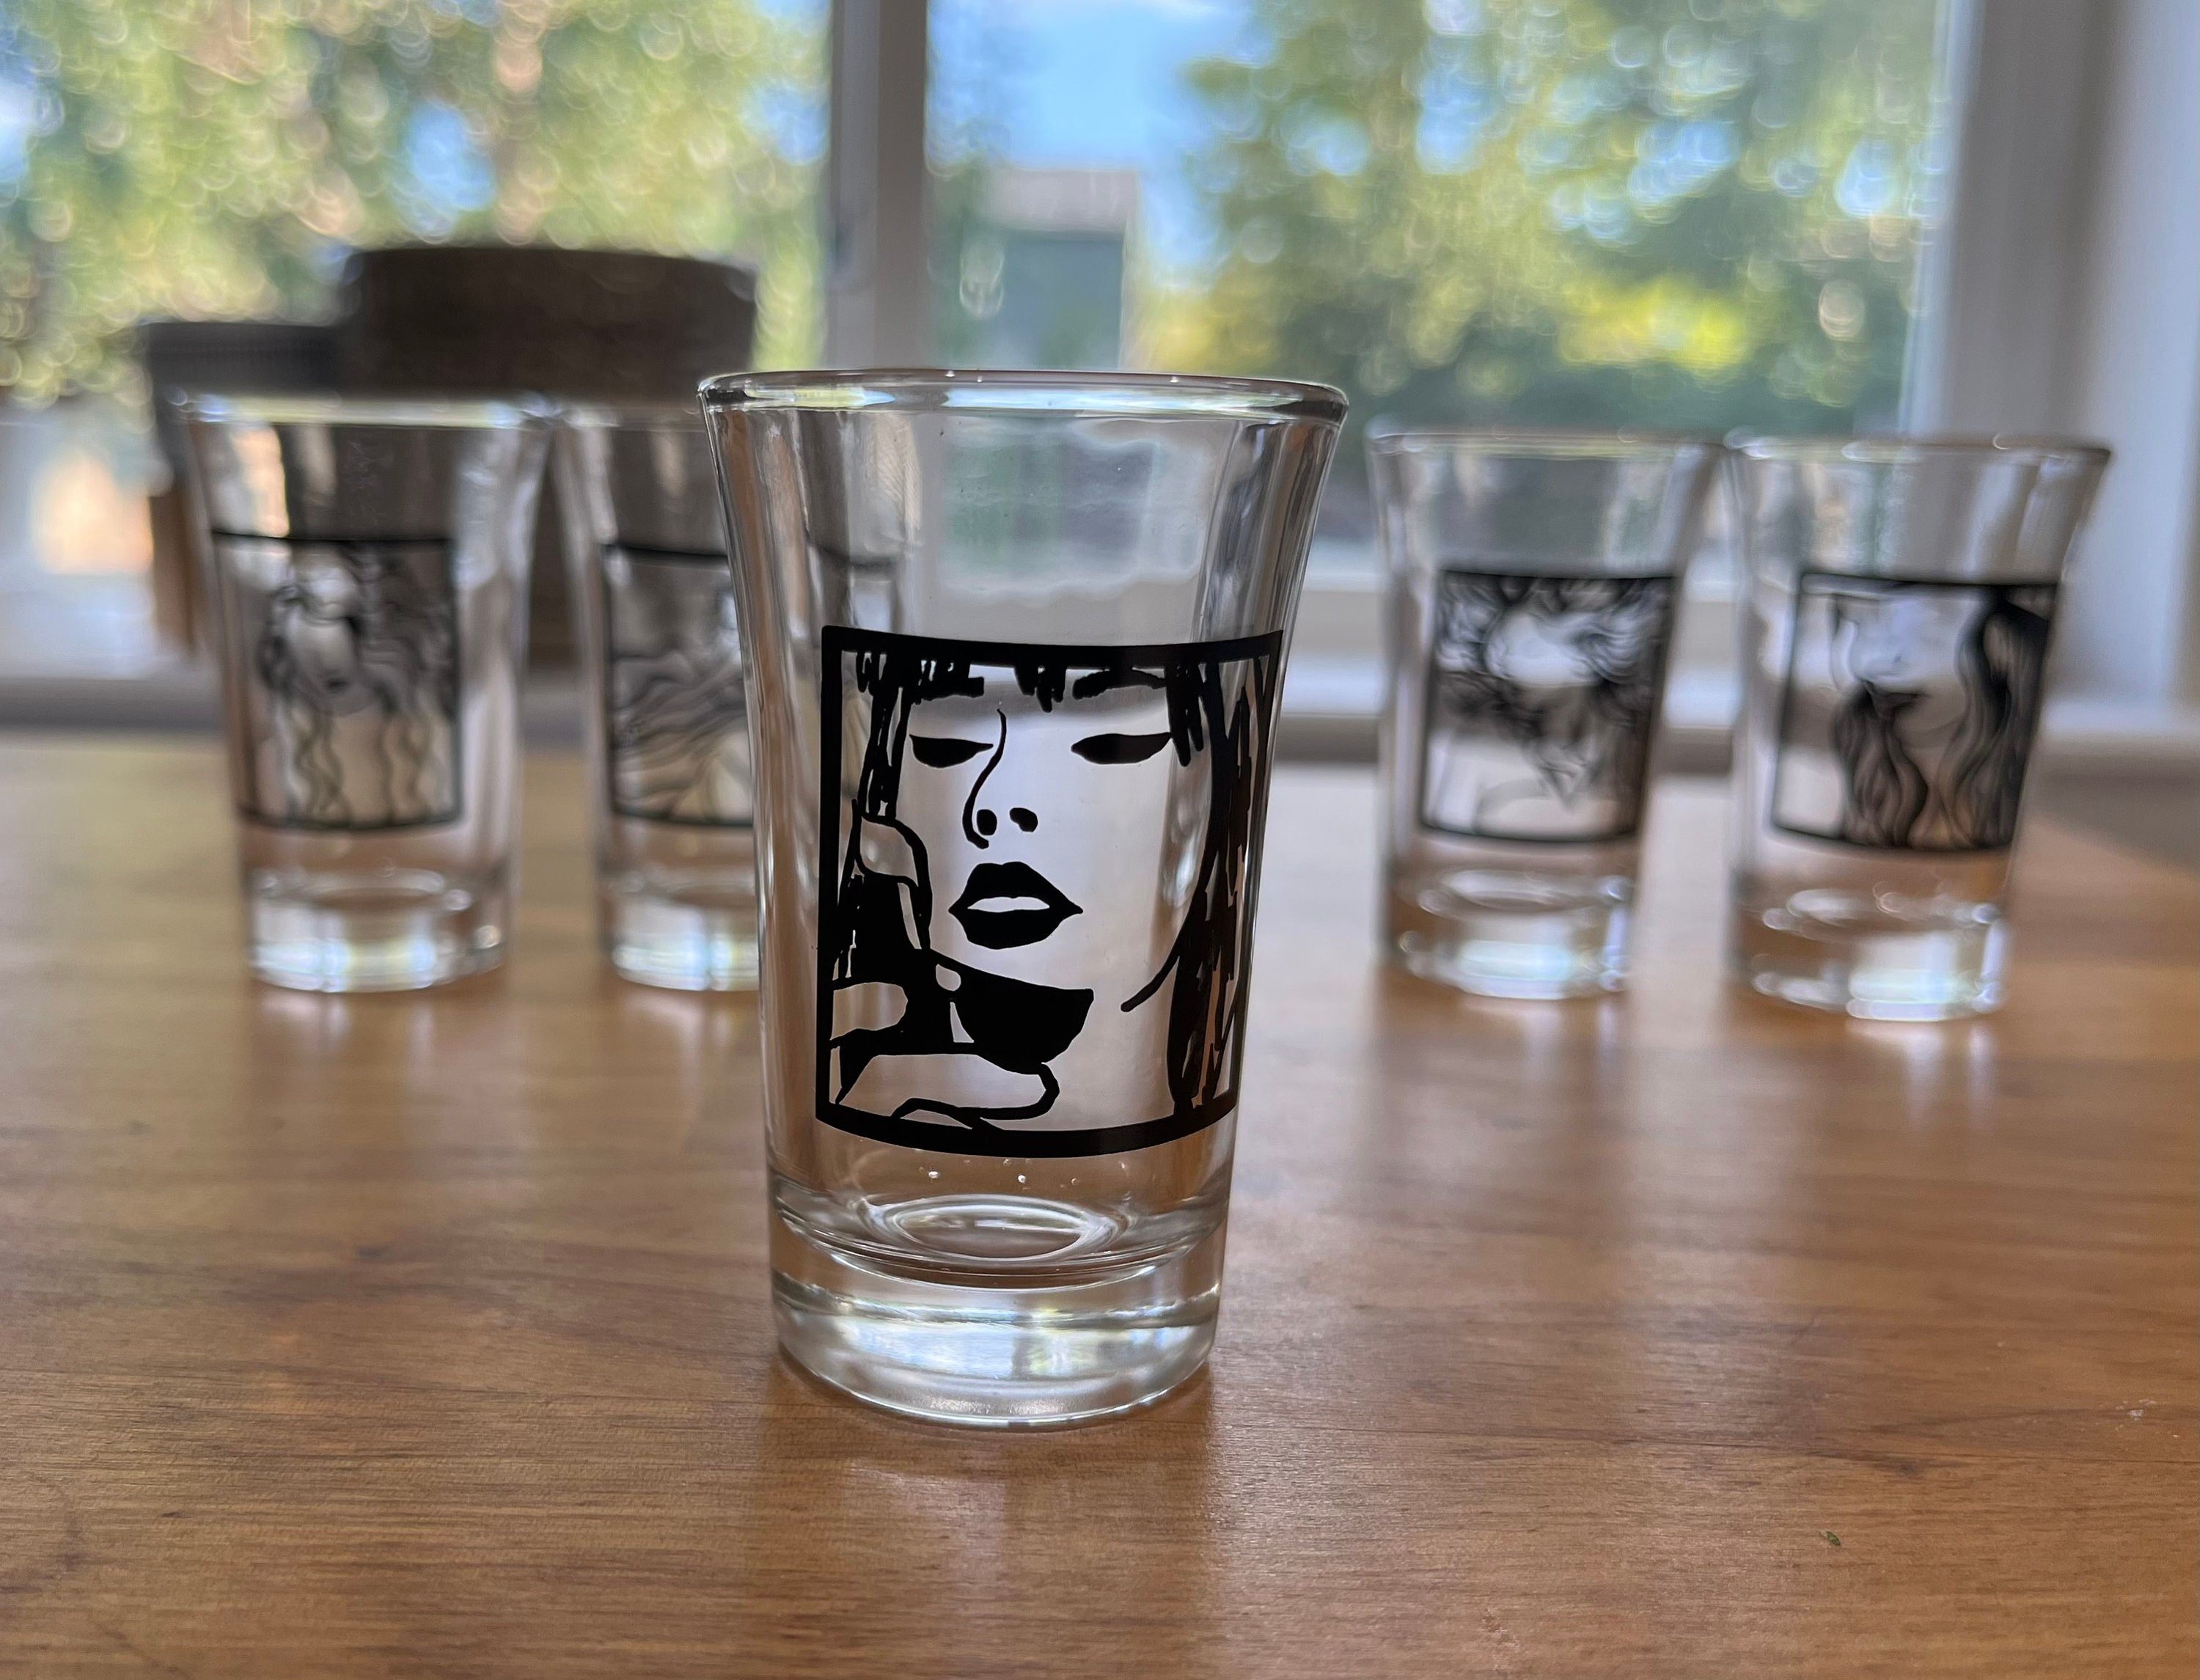 Swift shot glasses - eras, speak now, reputation, evermore, lover,  midnights, gift for her, swift gift, swiftie gift, Taylor, red, folklore